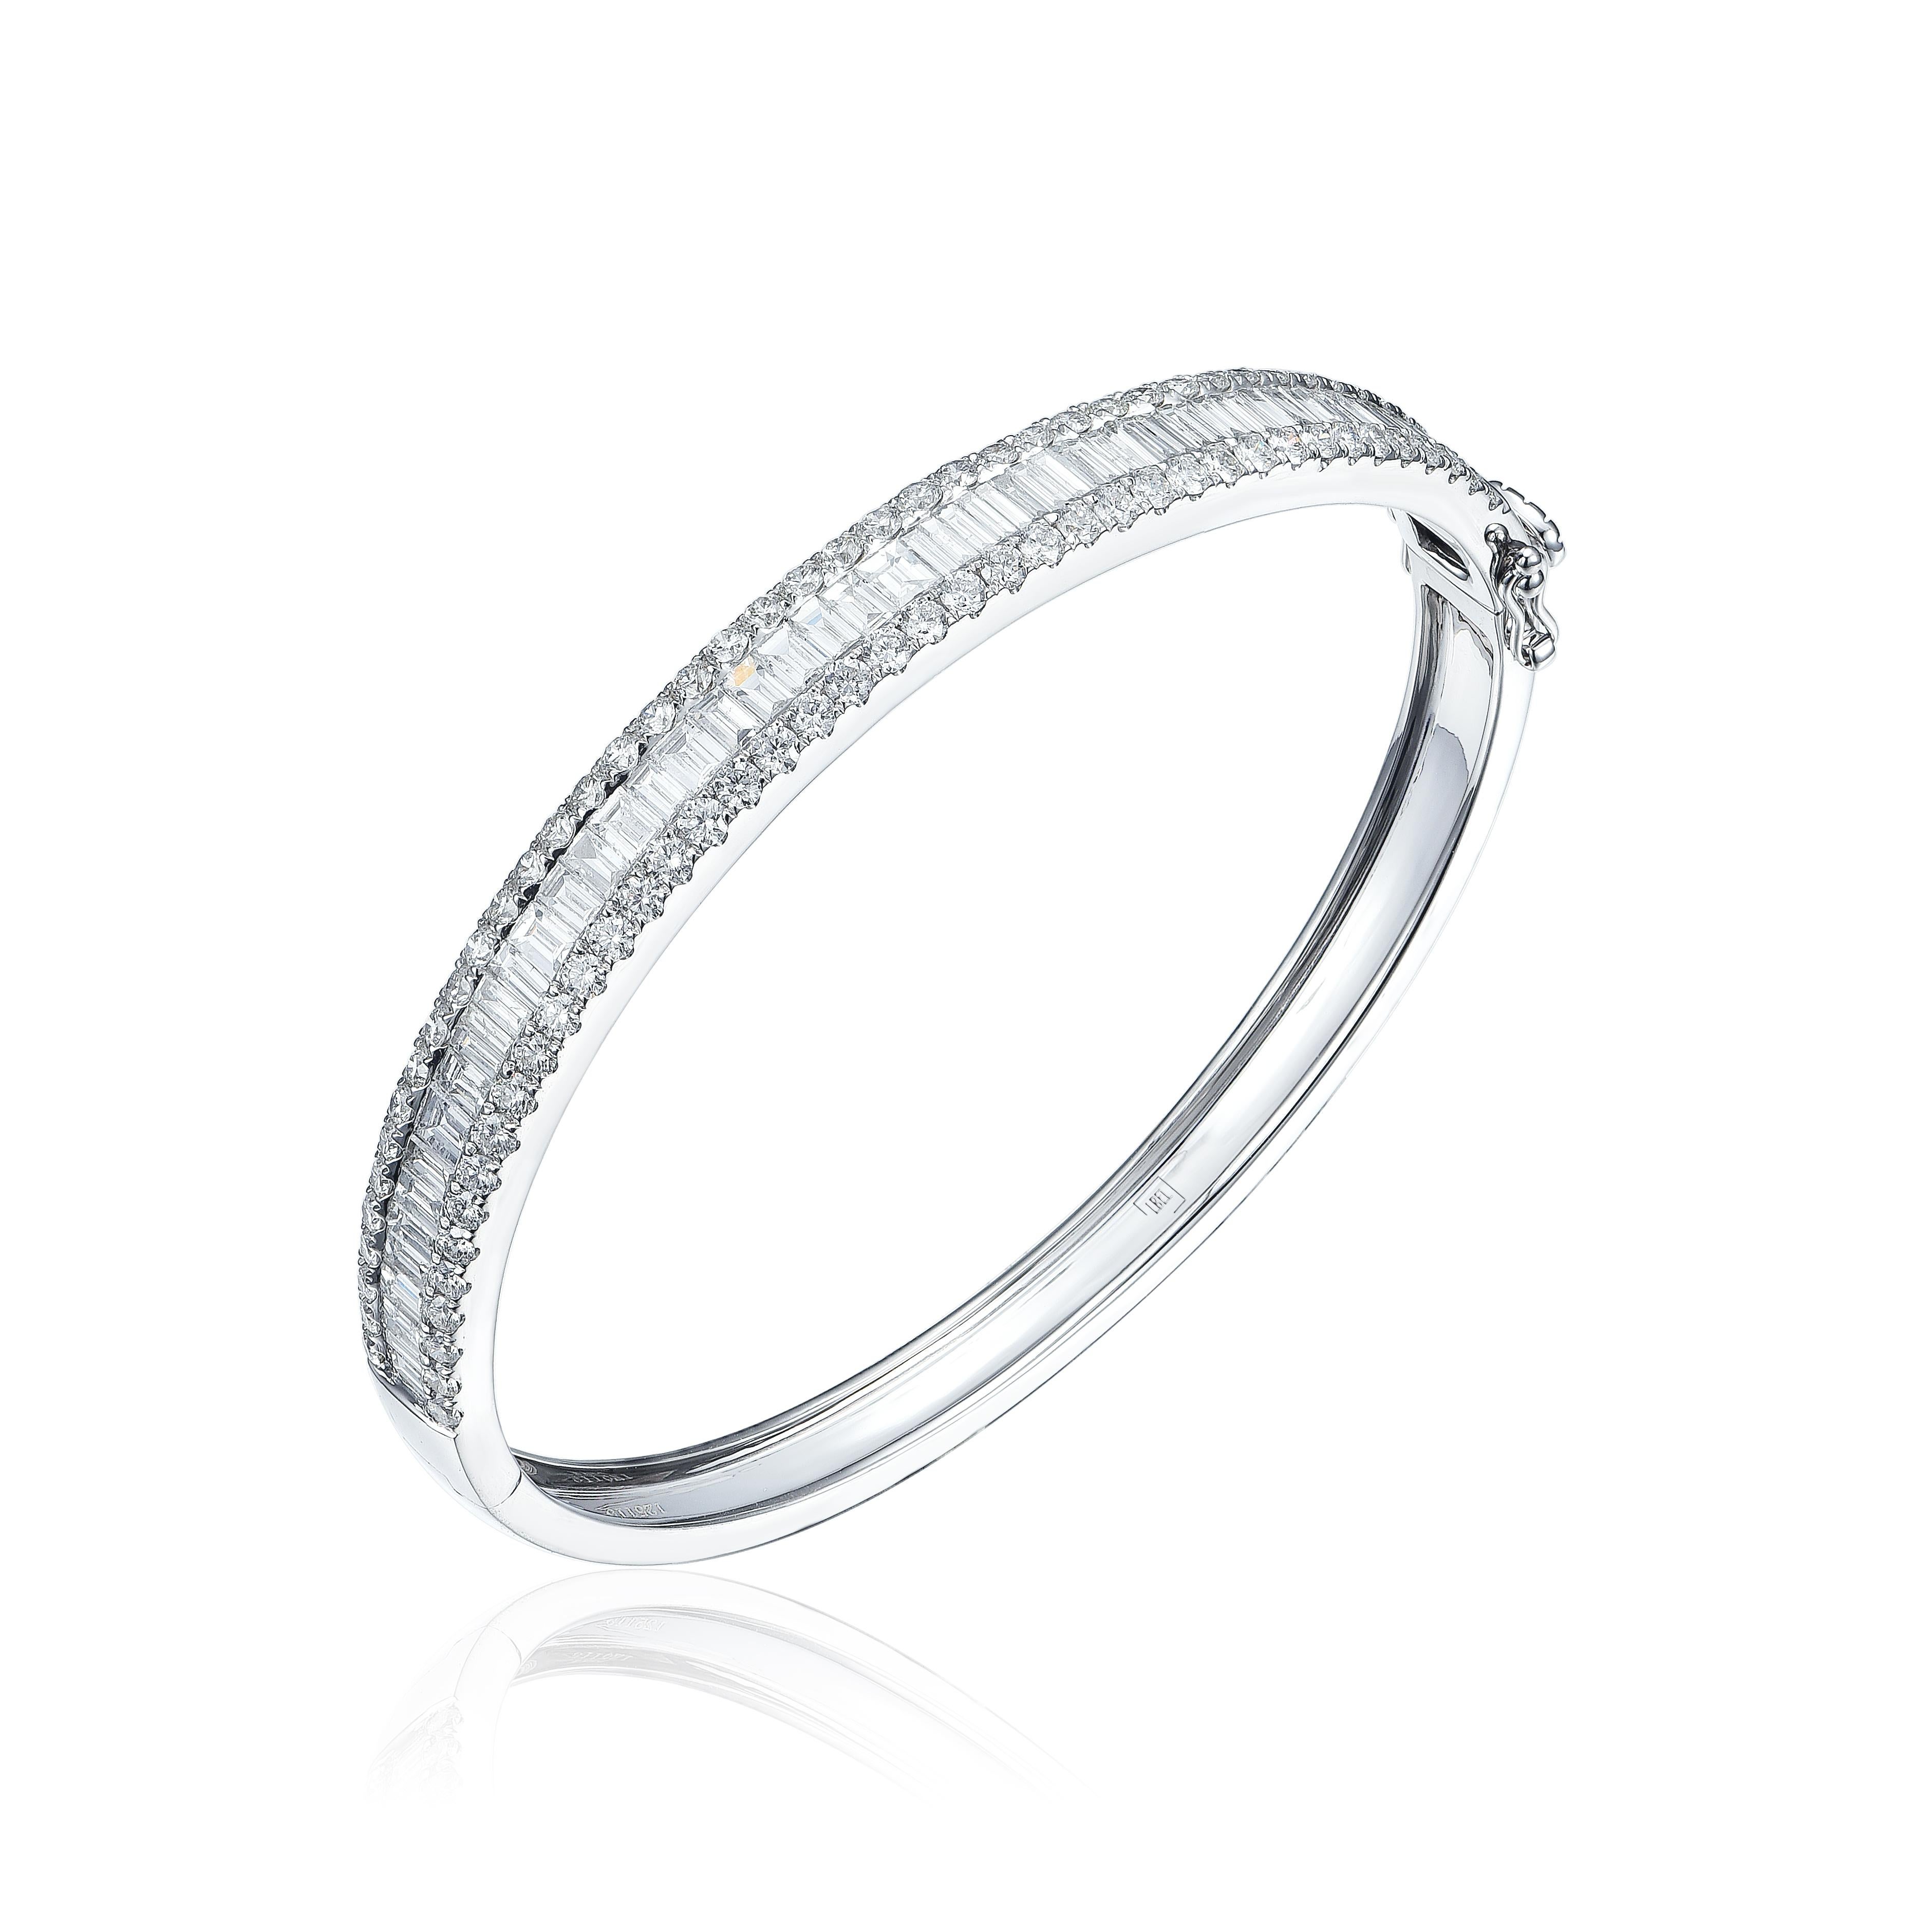 This bangle has 4.73cts of G color, VS2 clarity, baguette and round white diamonds set in 18K white gold. 